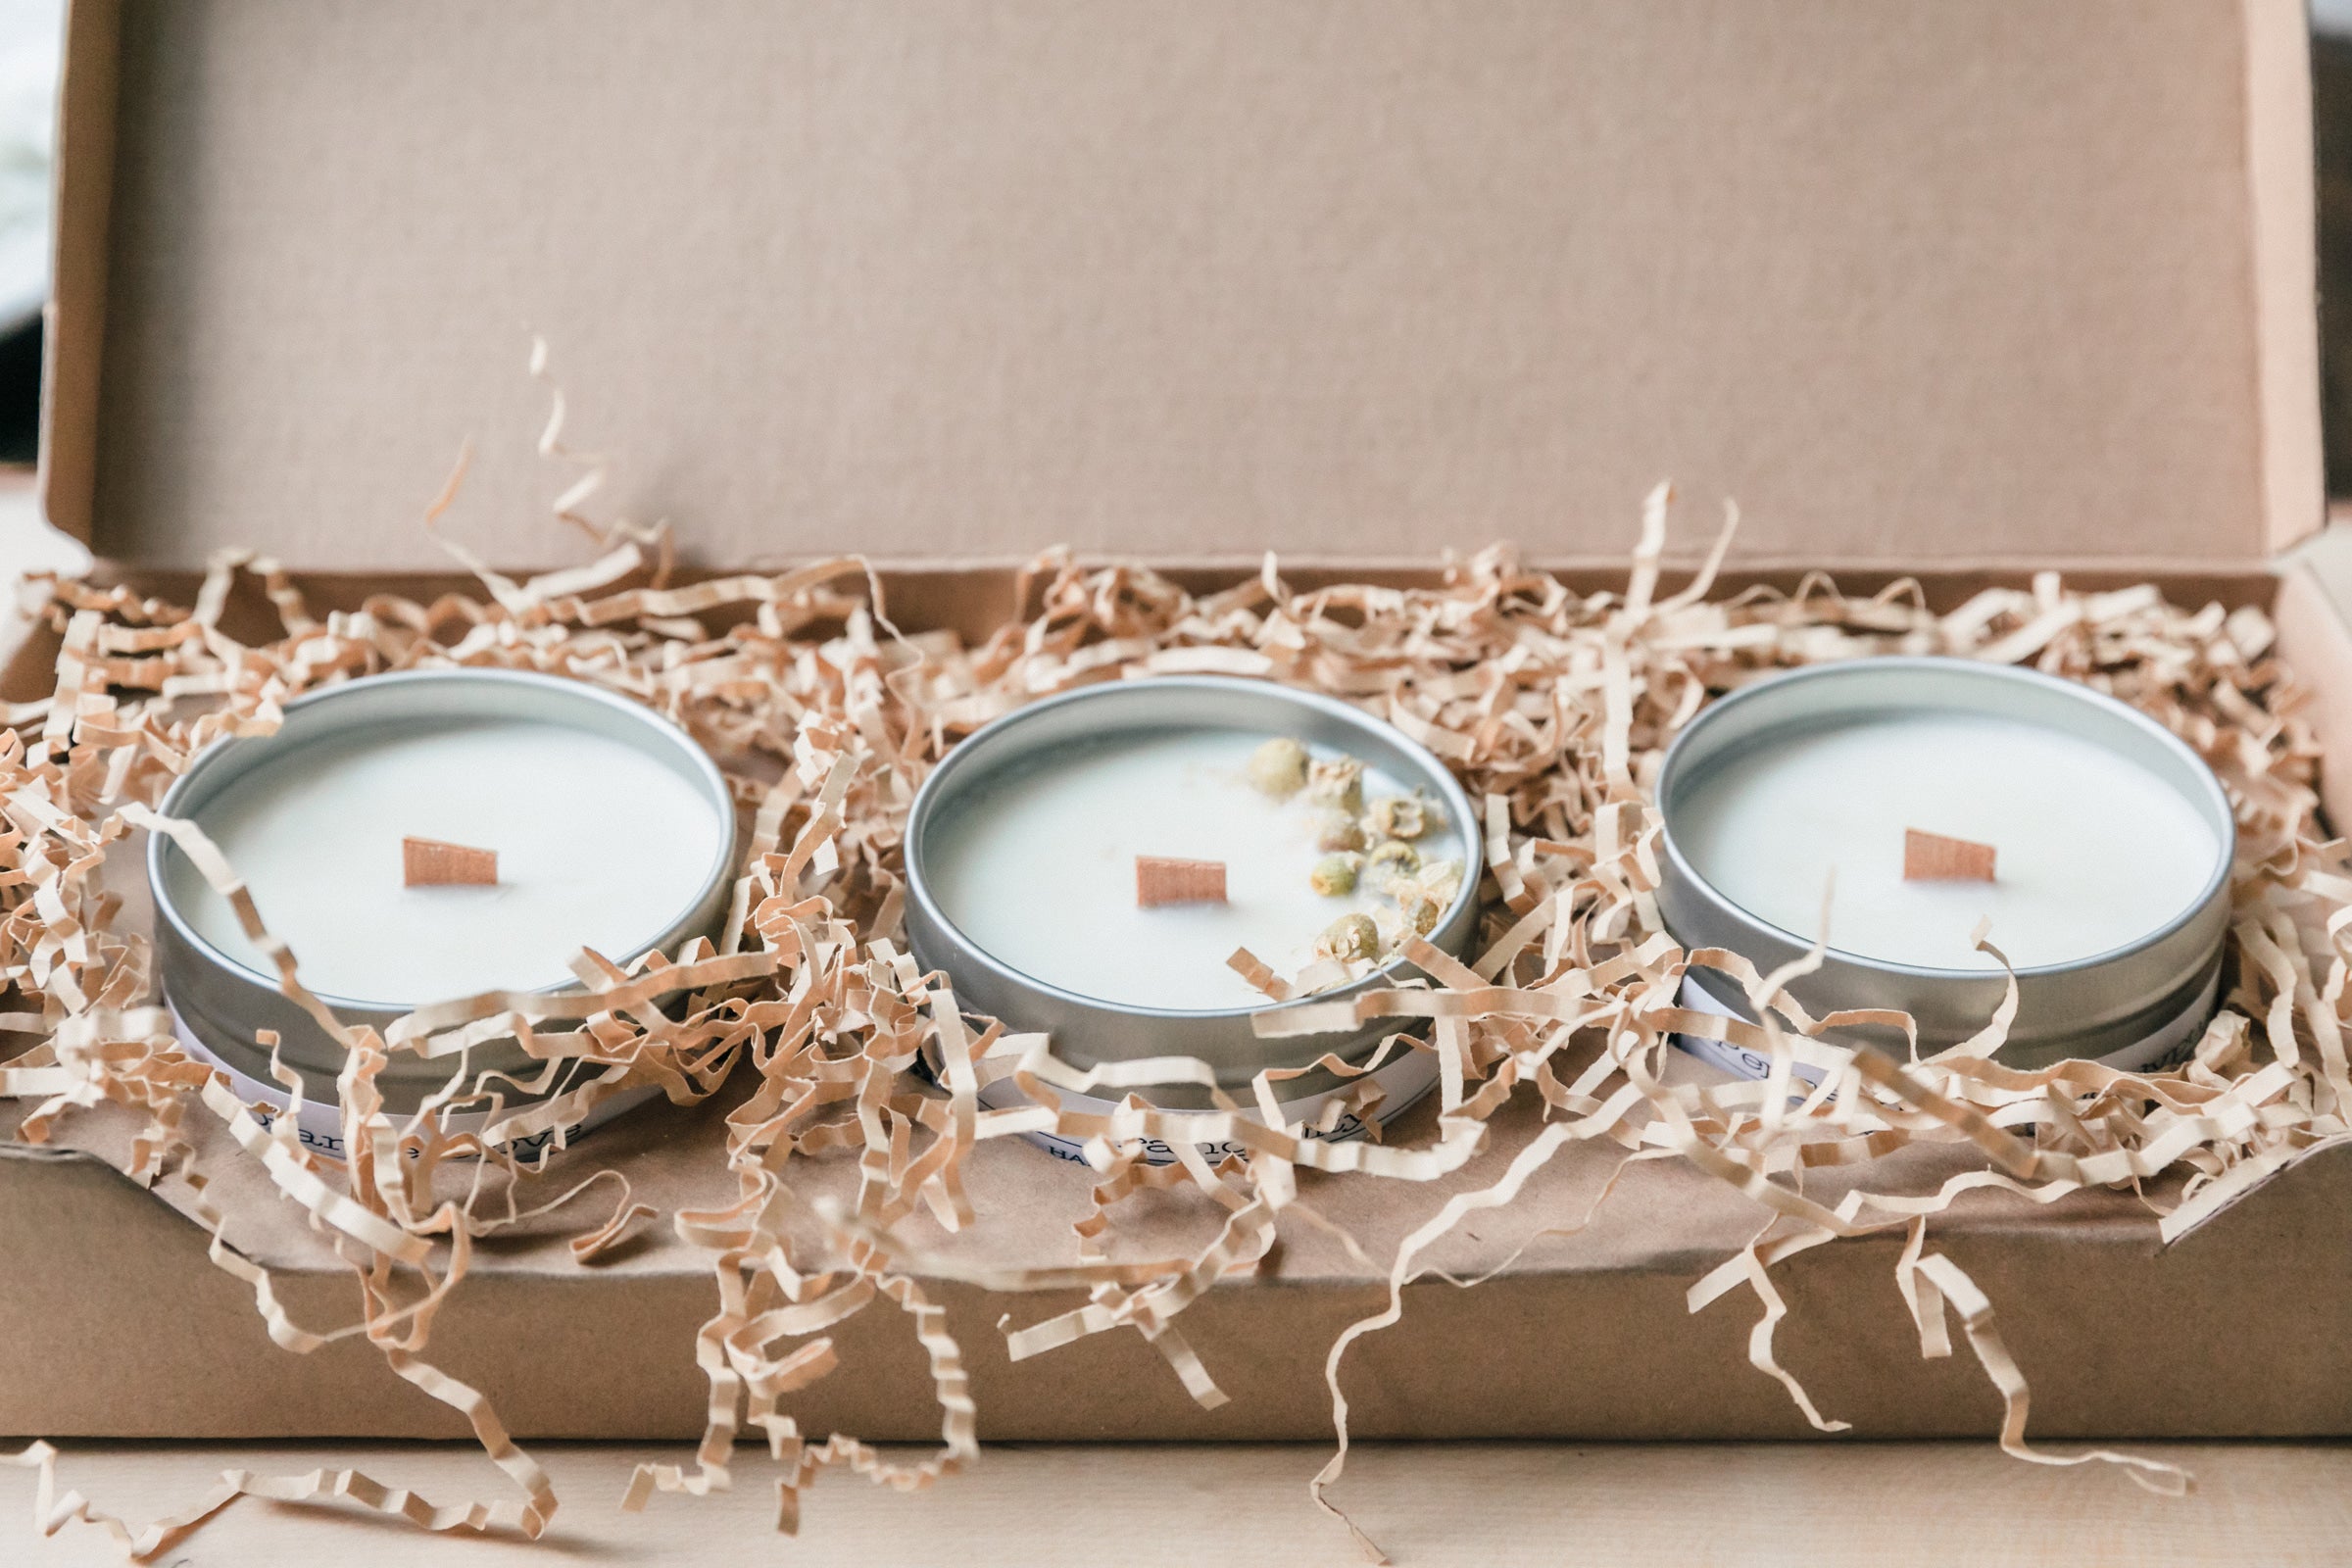 The Trio Candle Gift Set